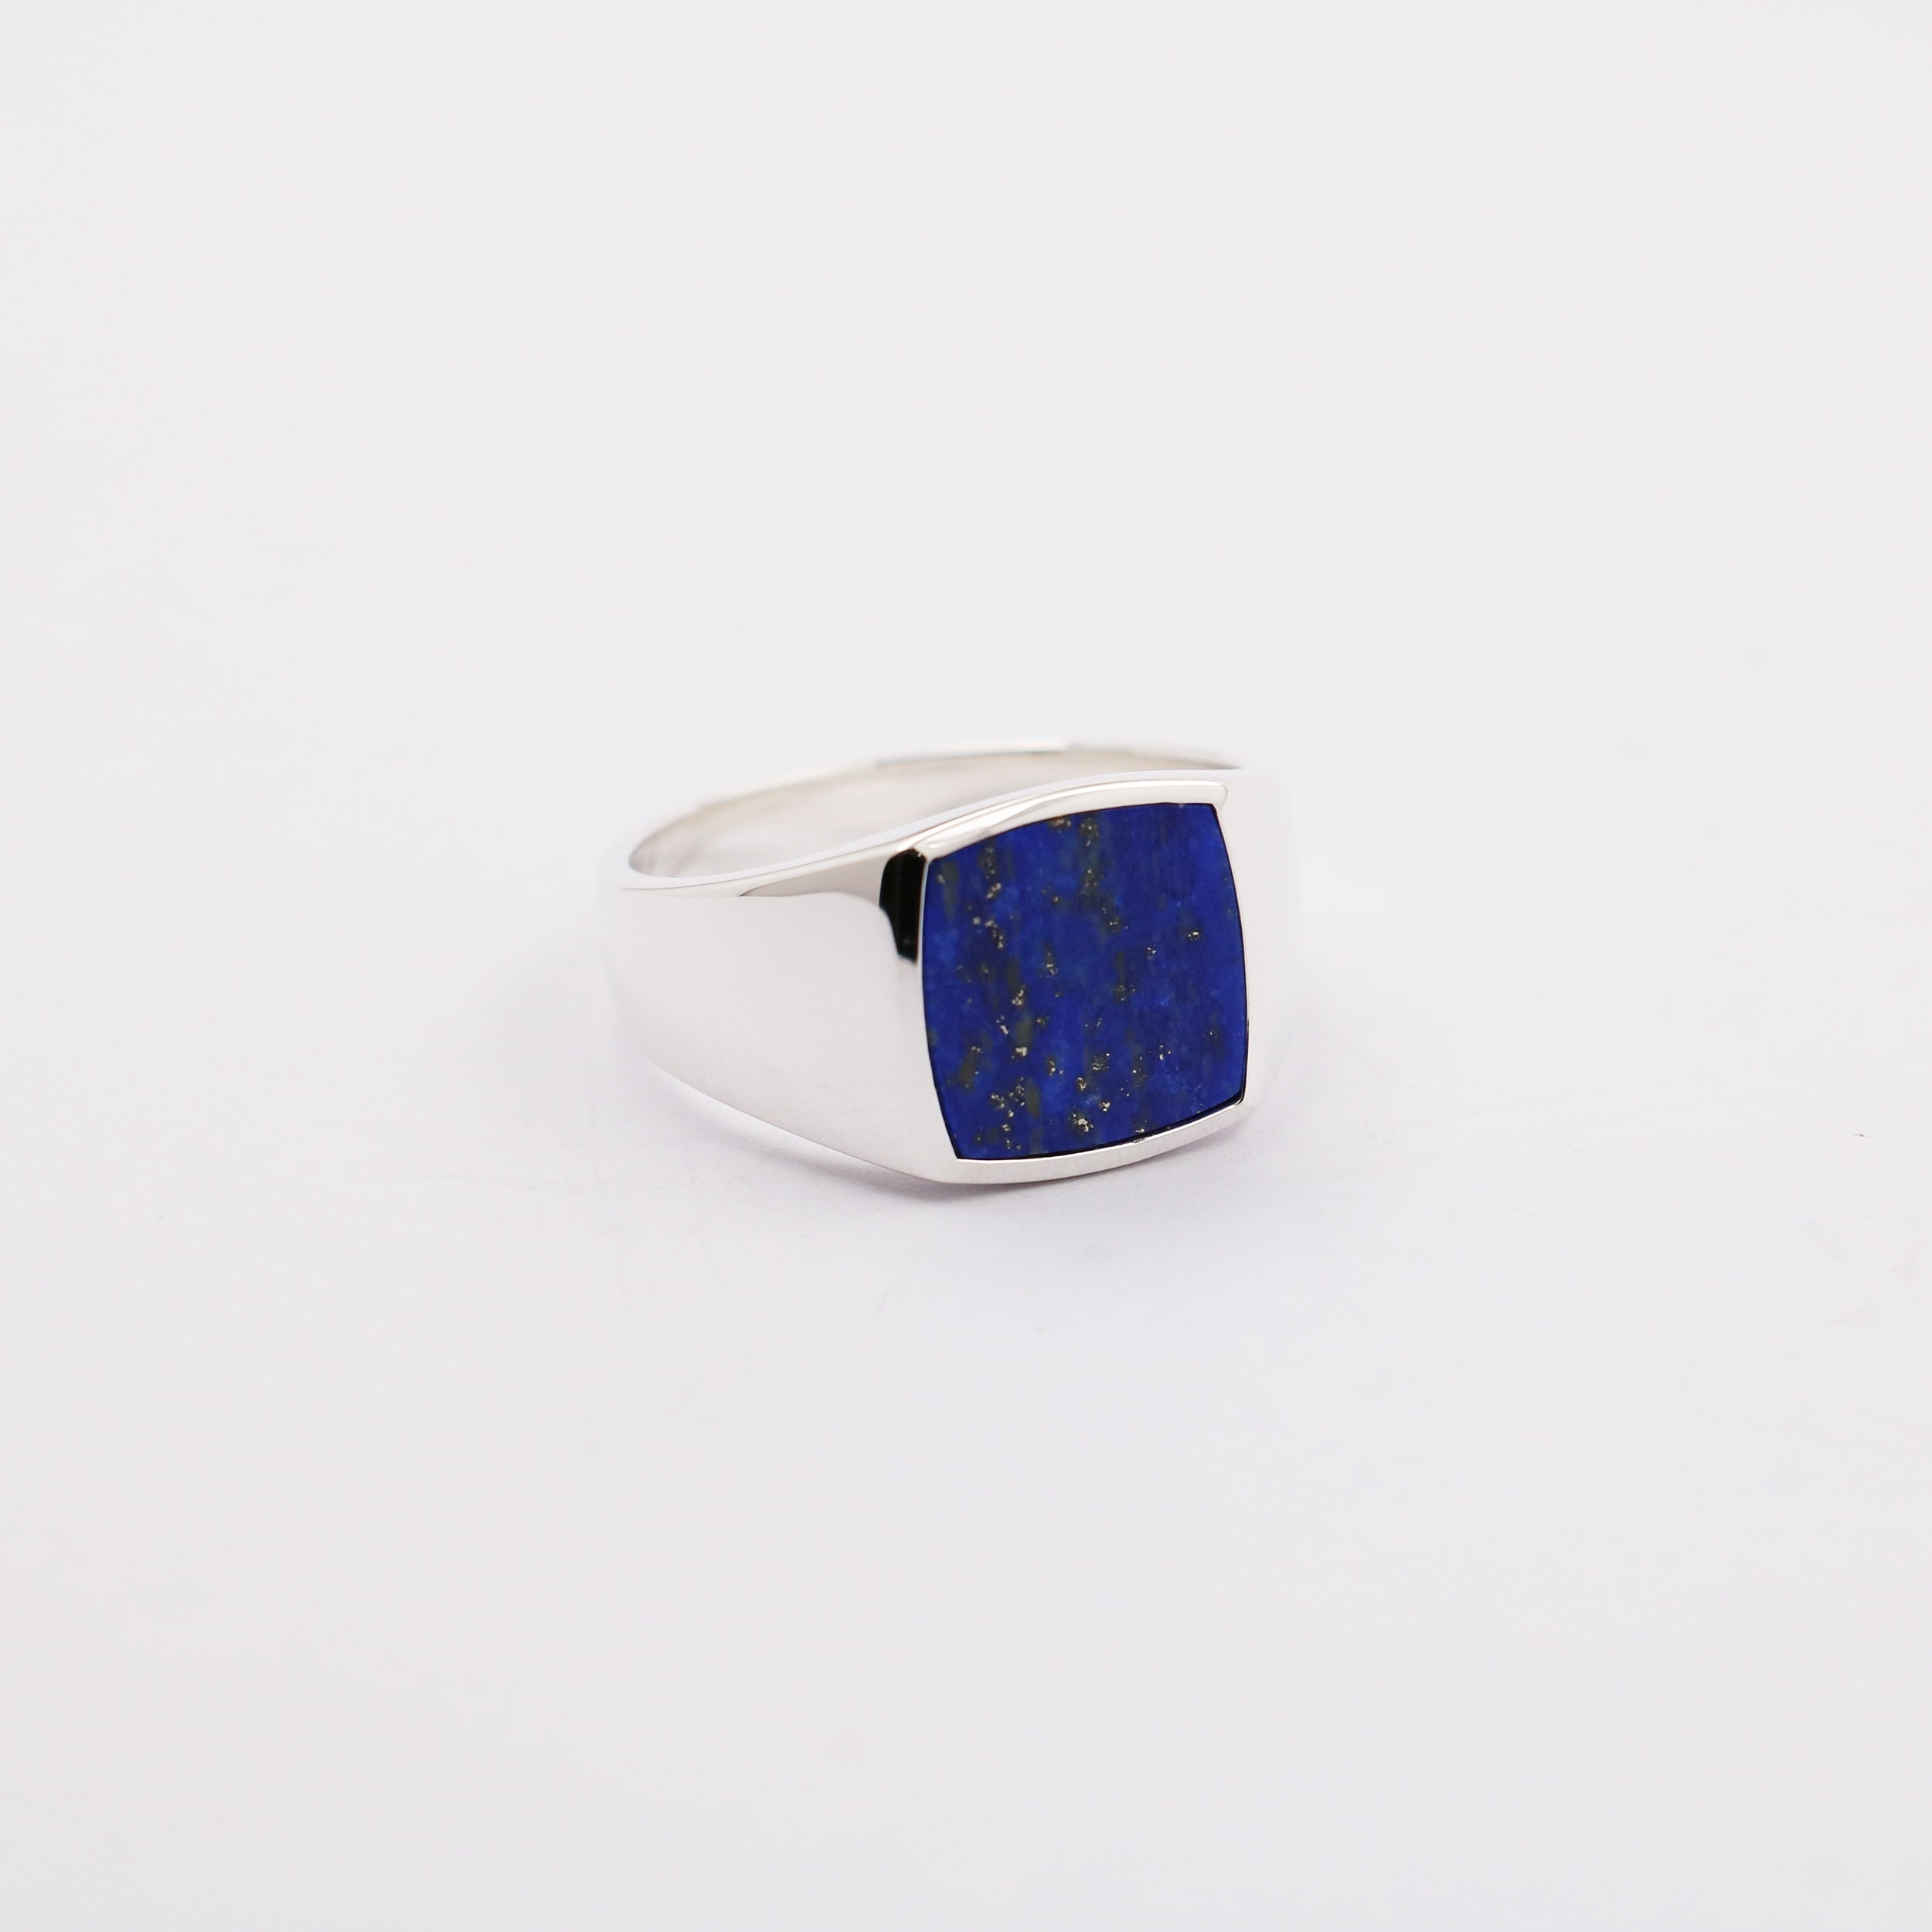 A Lazuli Wisdom Ring | Sterling Silver from Rebel Saint Co with a lapis lazuli stone.